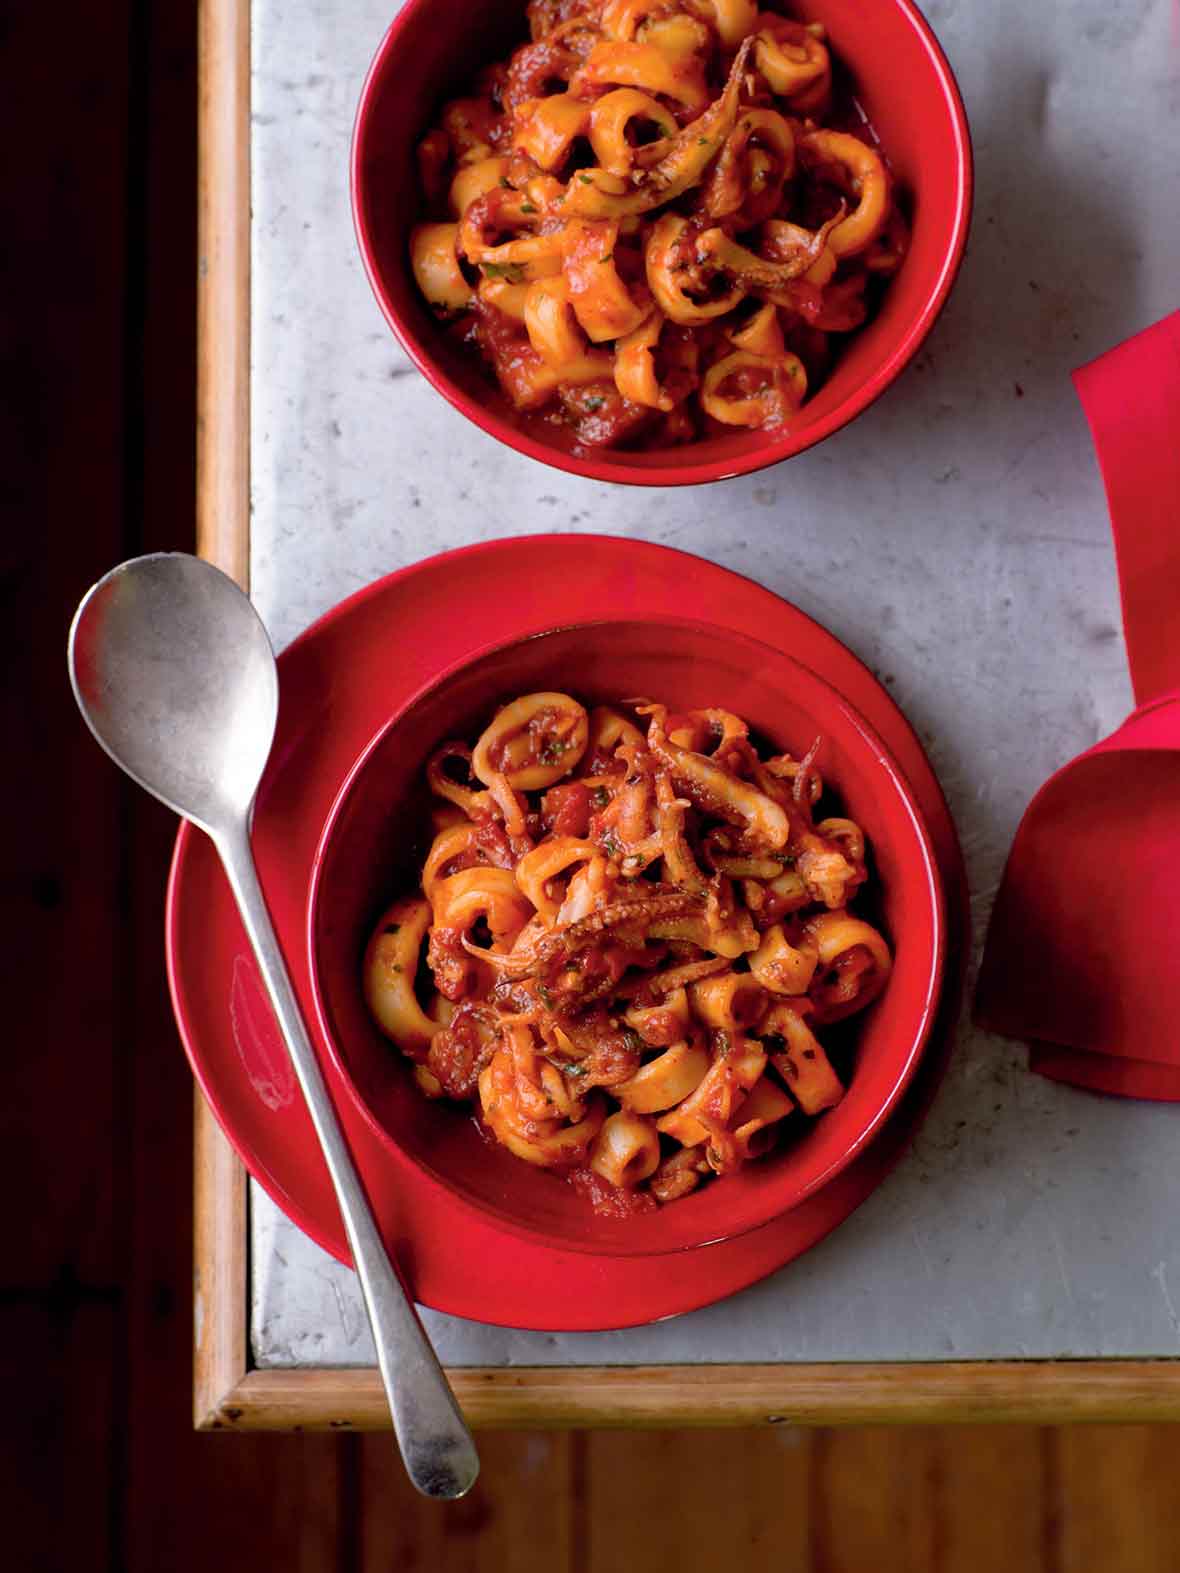 A red bowl with Christmas Eve calamari--calamari, onion, garlic, red pepper flakes in a tomato sauce